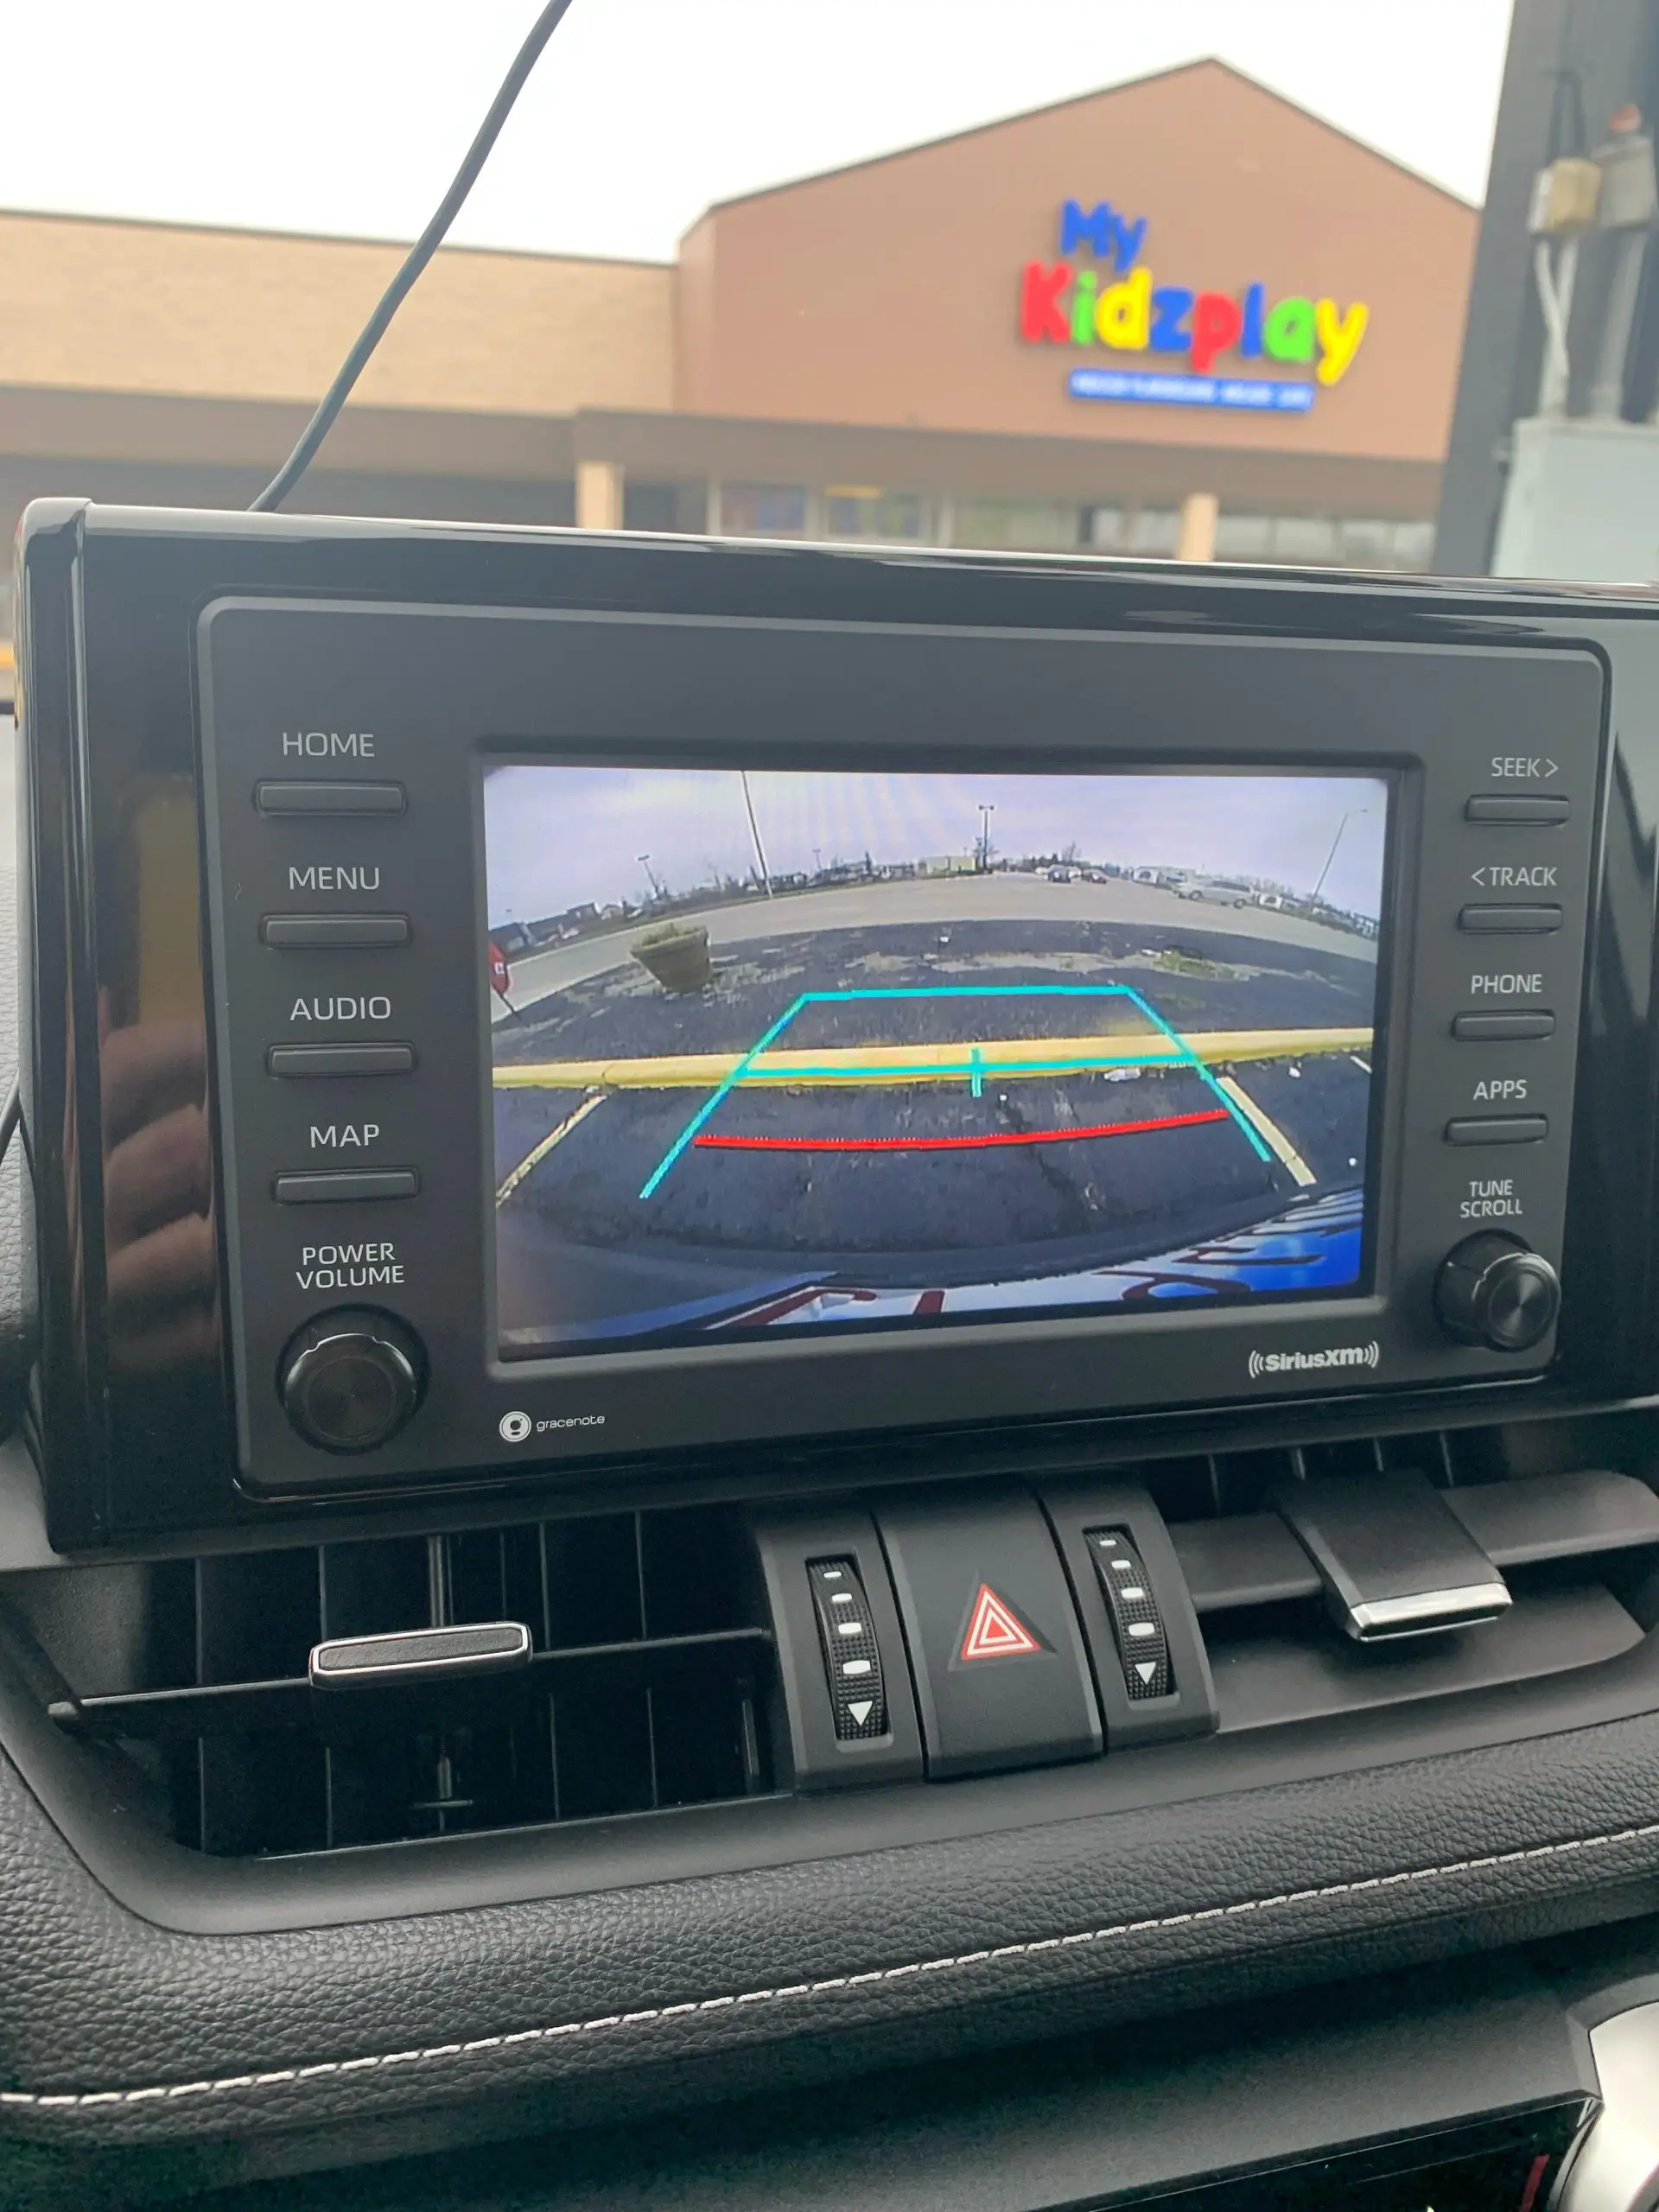 Backup Camera With Projected Path Vs Dynamic Gridlines